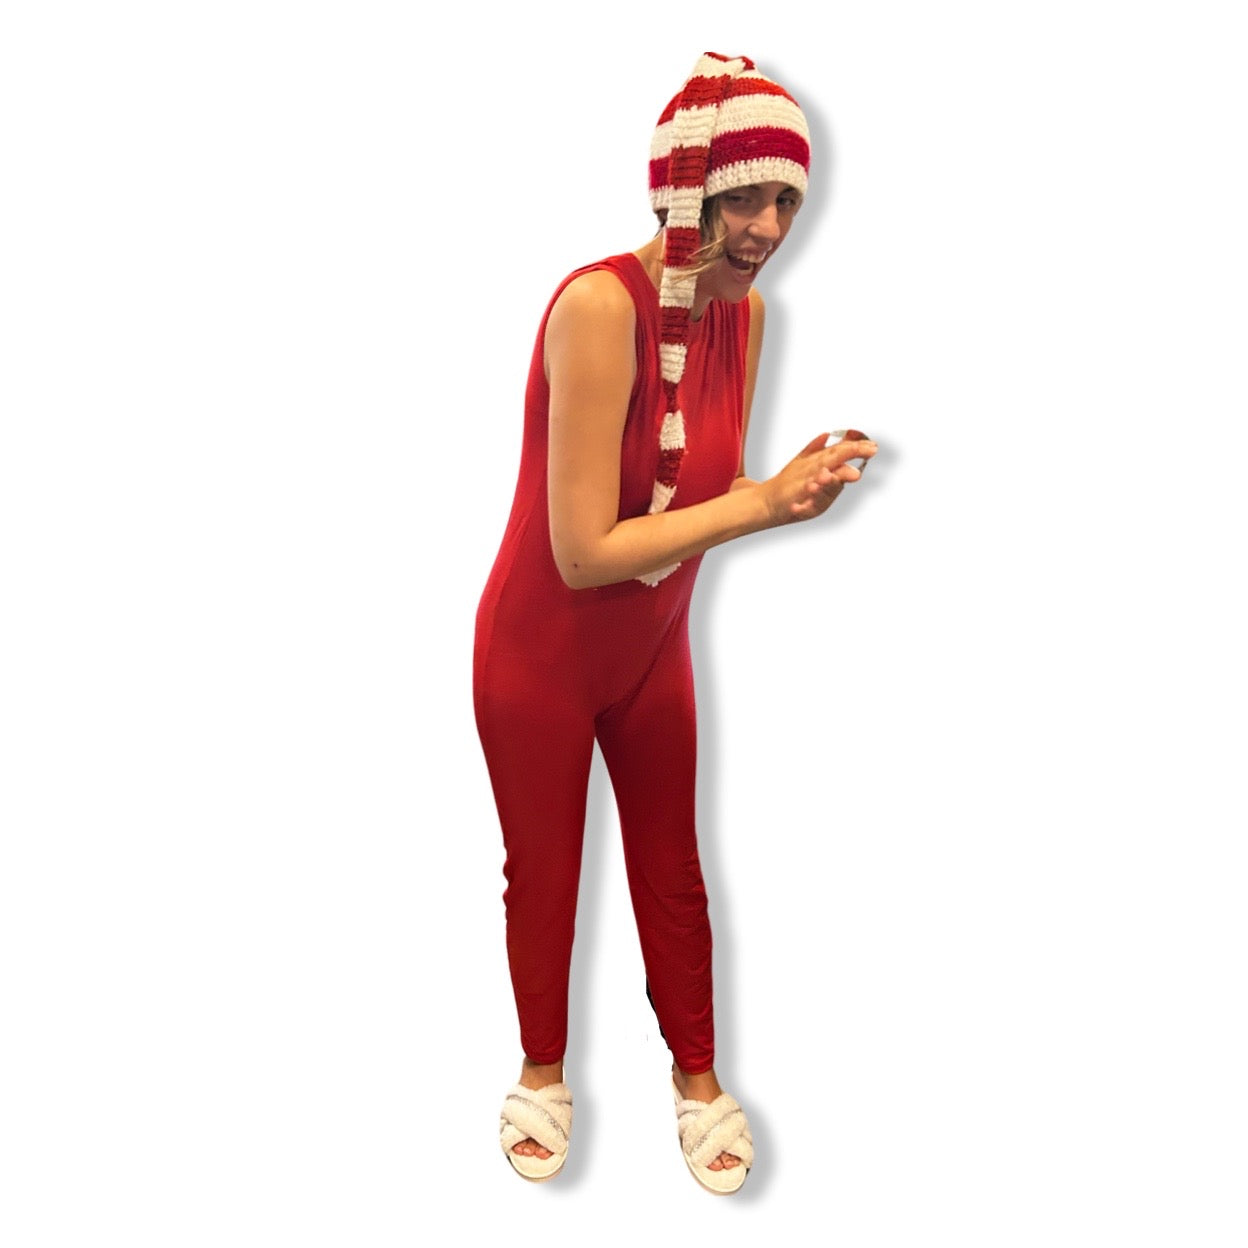 A woman wearing a red jumpsuit and hat, designed as a Special Needs Zip Back Bodysuit